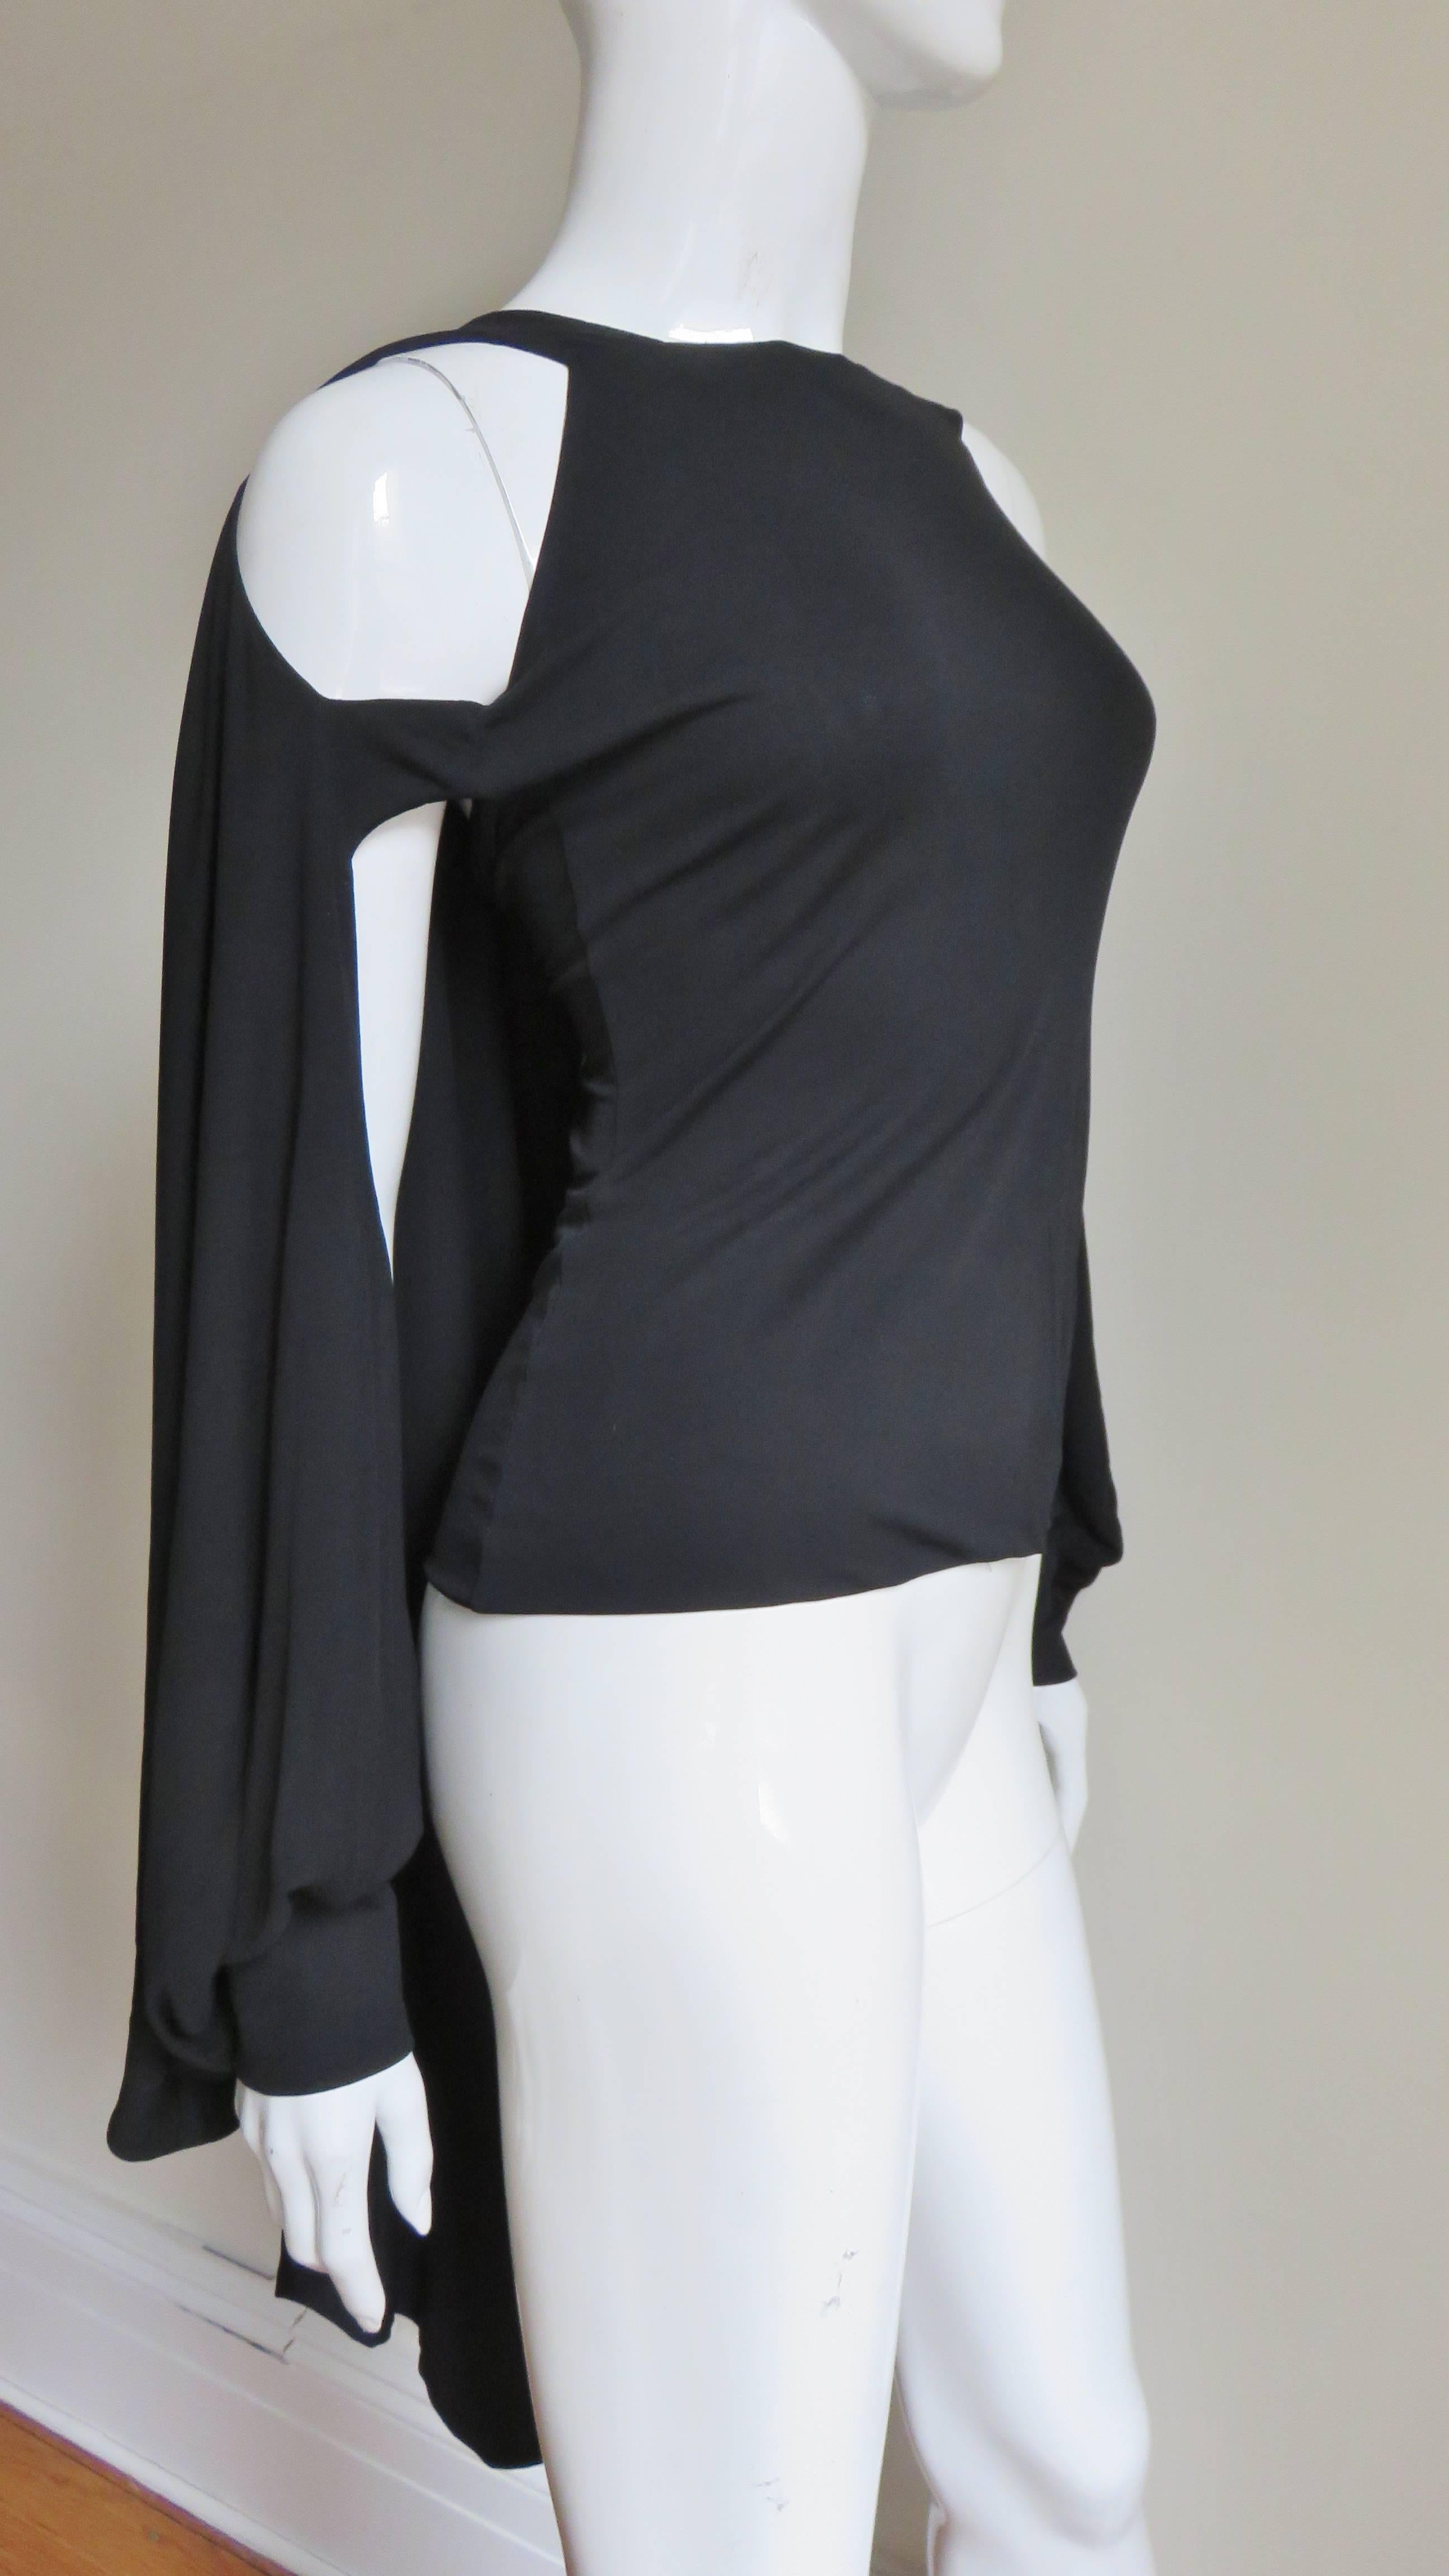 Antonio Berardi New Silk Cut out Cape Top In Excellent Condition For Sale In Water Mill, NY